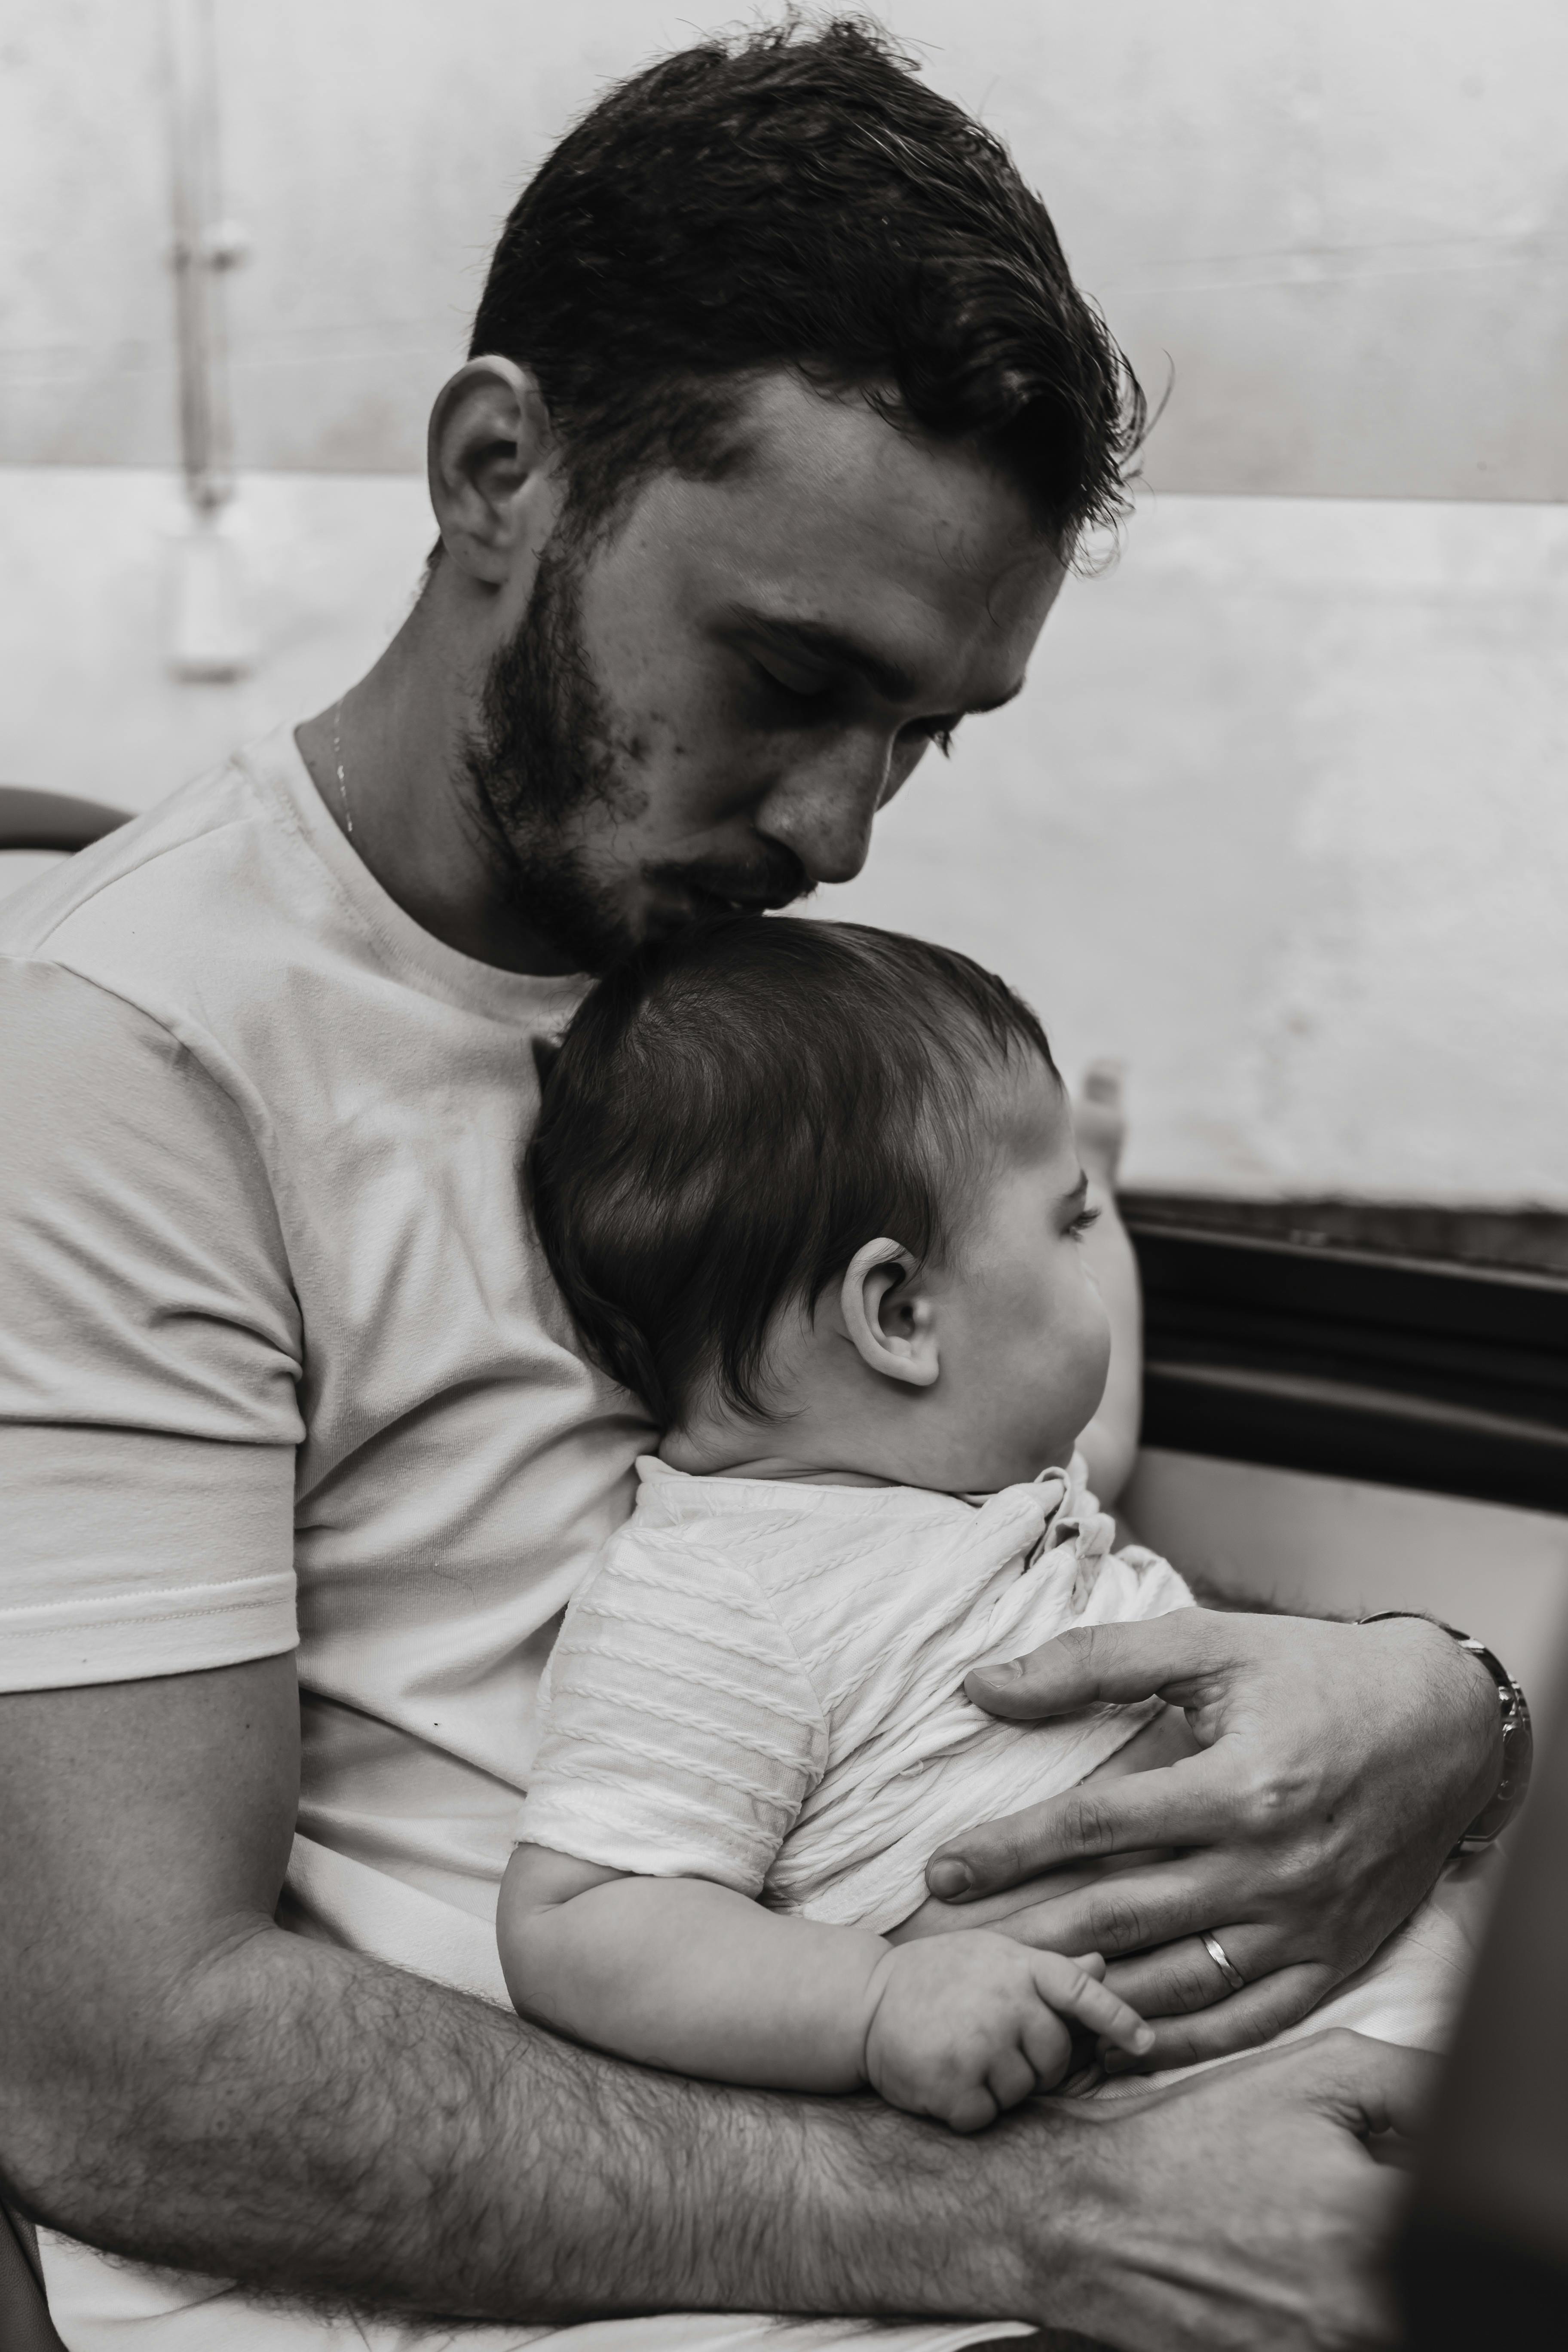 A father and his baby | Source: Pexels